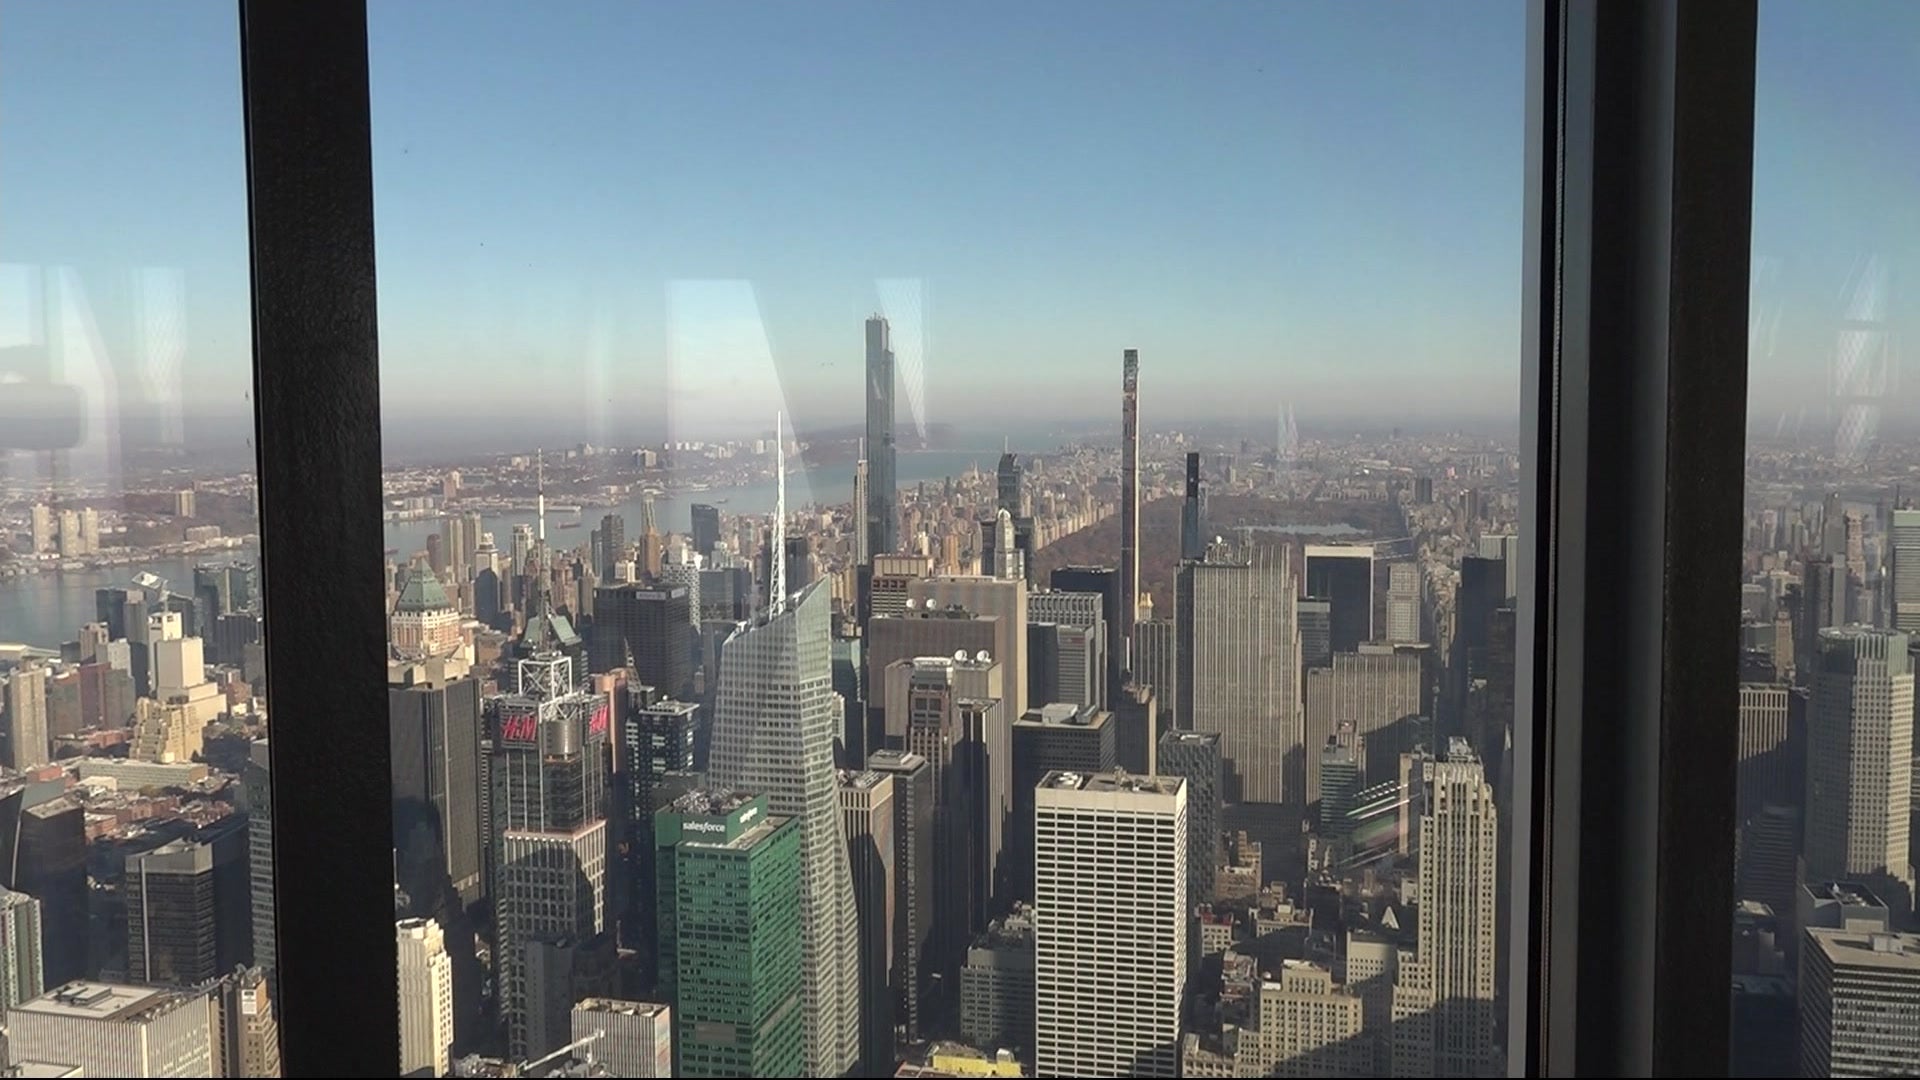 Empire State Building offers 360-degree views of NYC in new exhibit